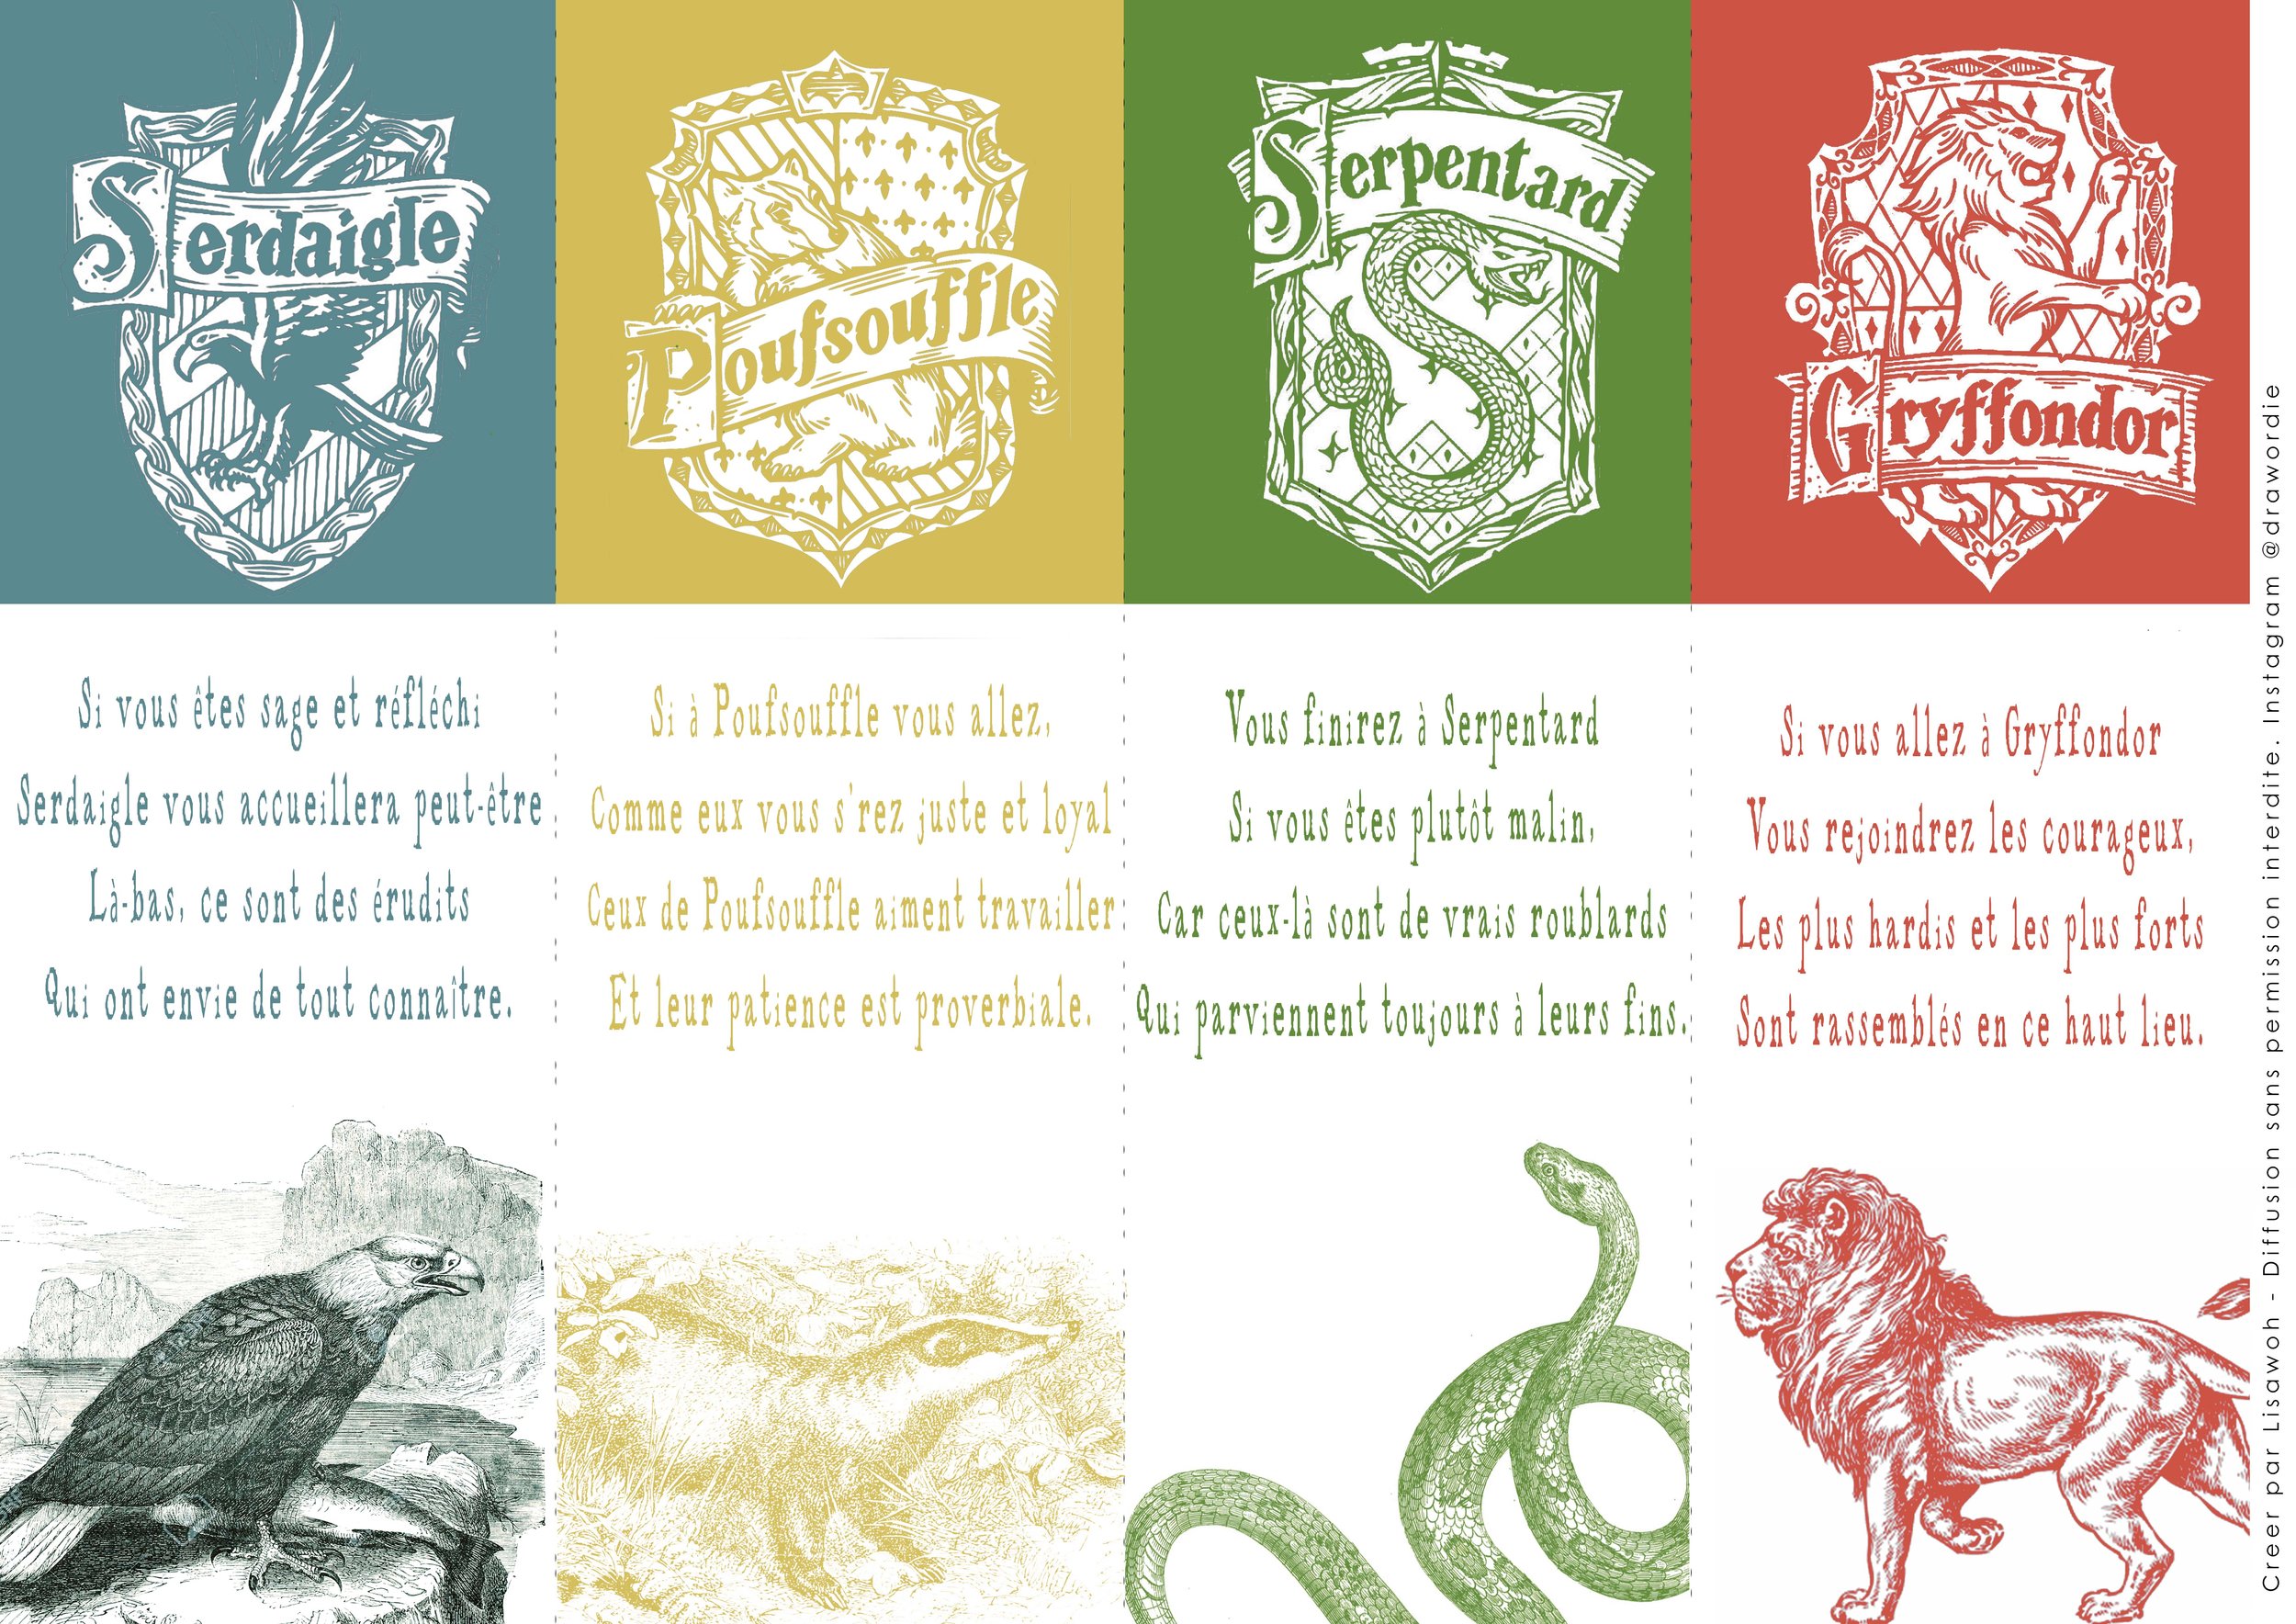 Marque page Harry Potter